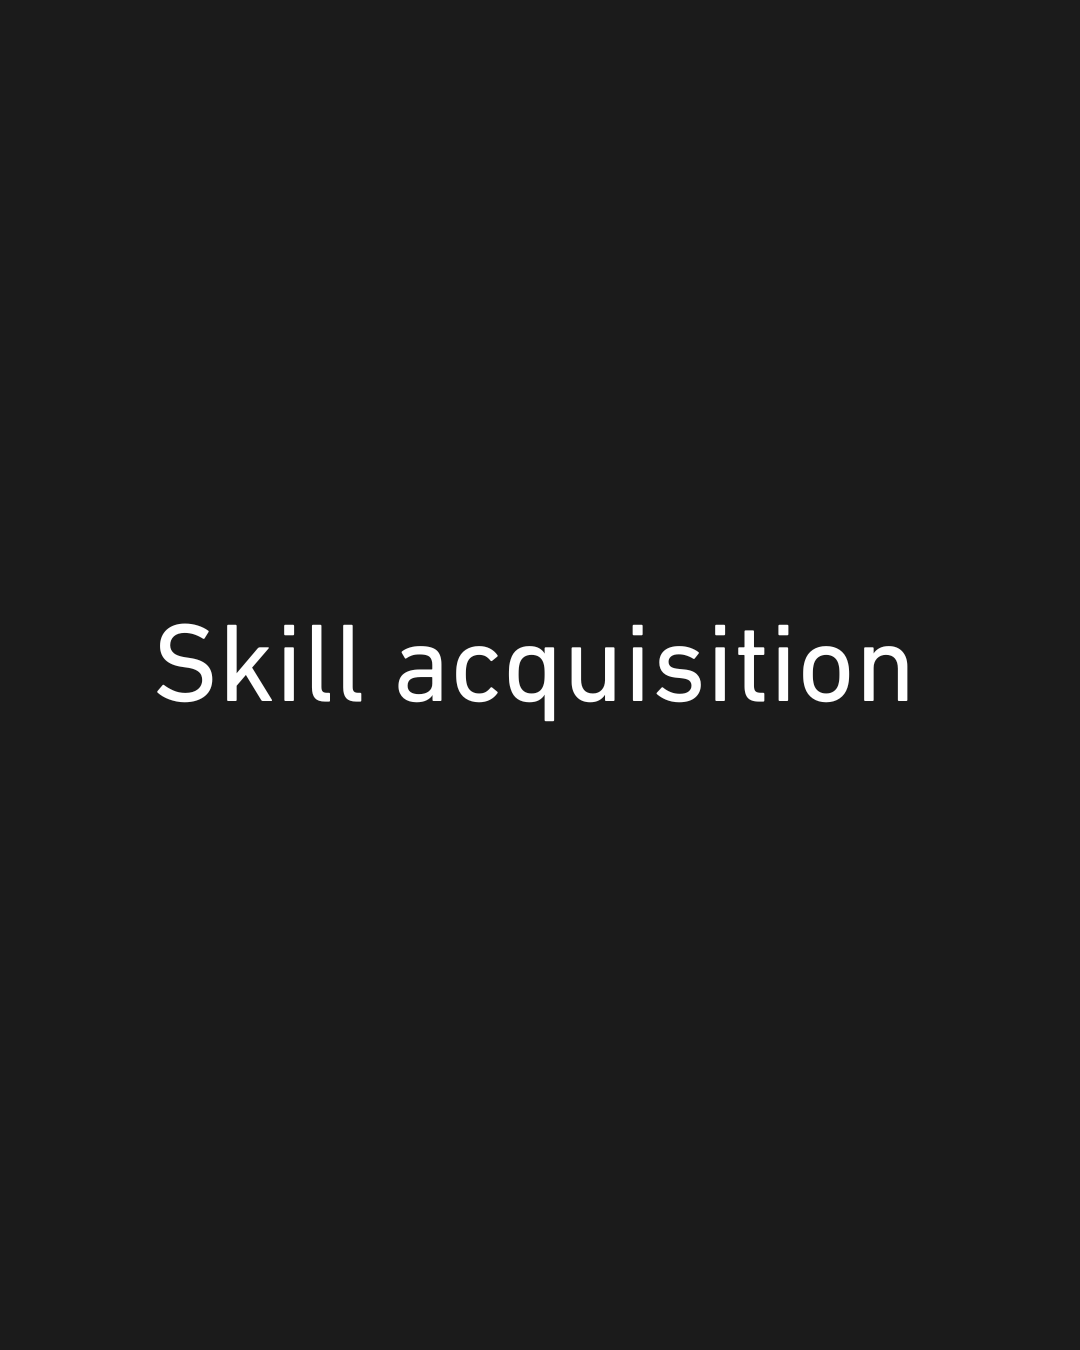 My skill acquisition journey